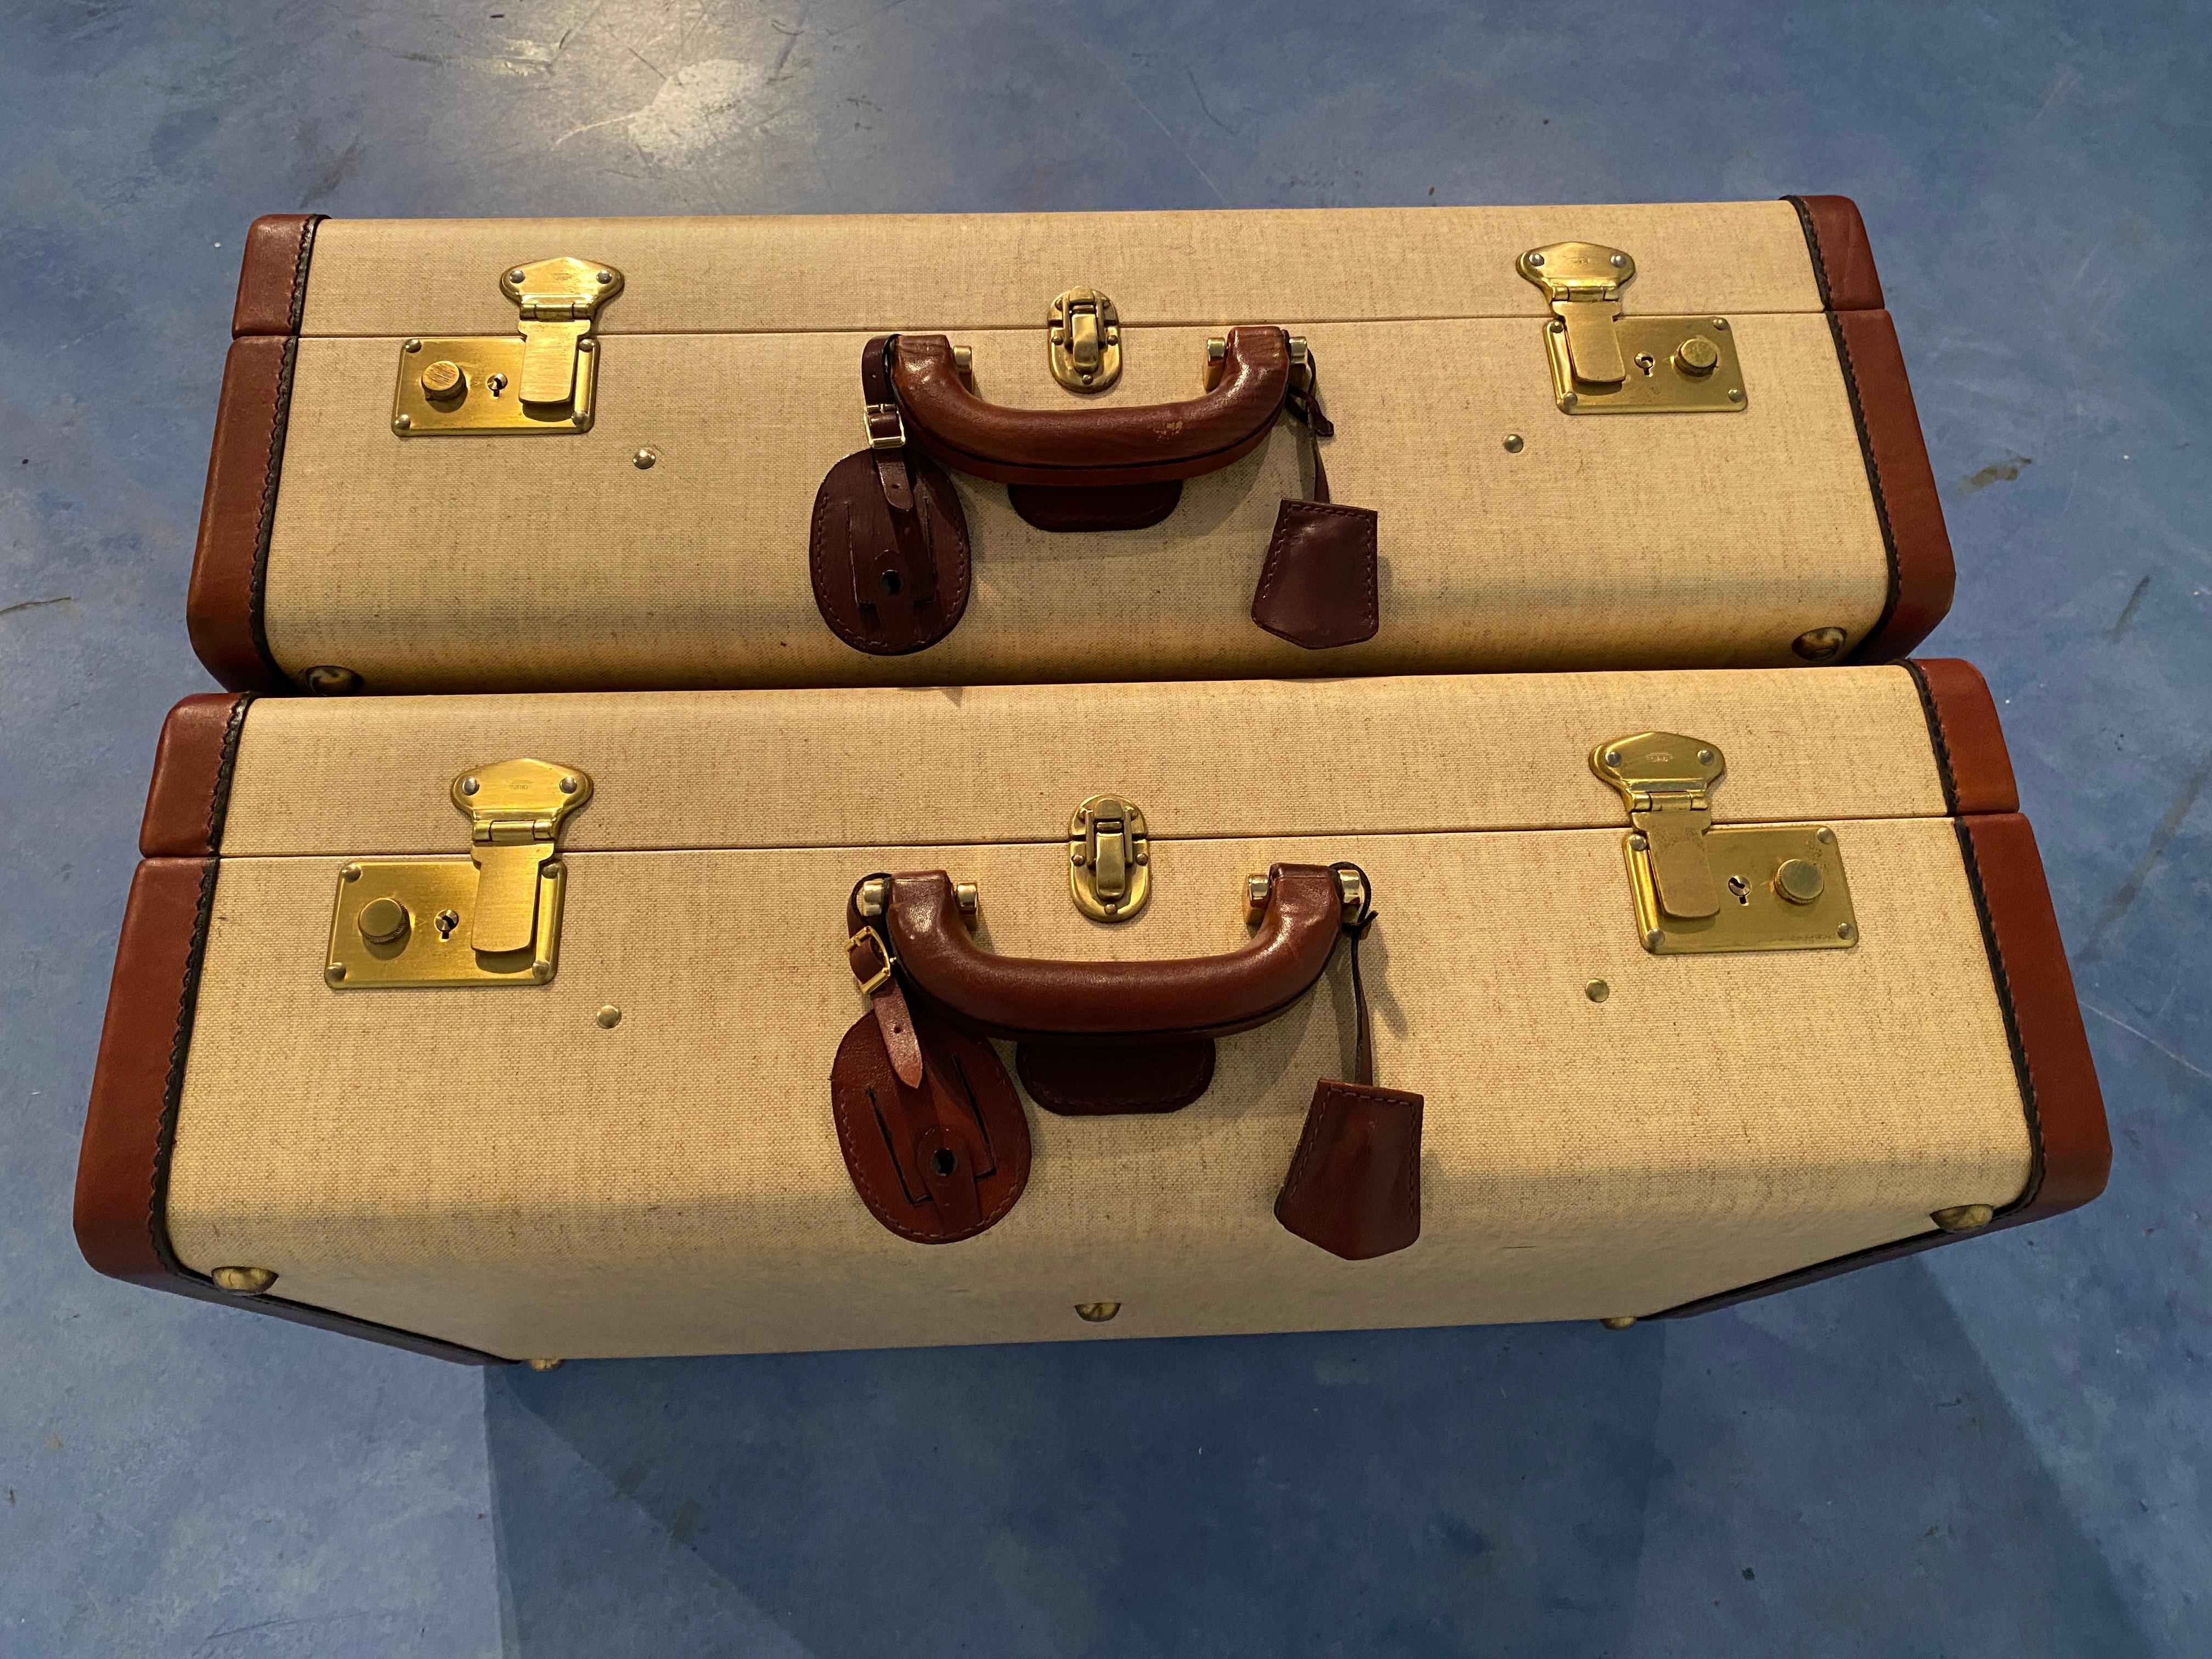 Italian Mid-Century Moder Luggages or Suitcases Mèlange Color, Set of Two, 1960 For Sale 10